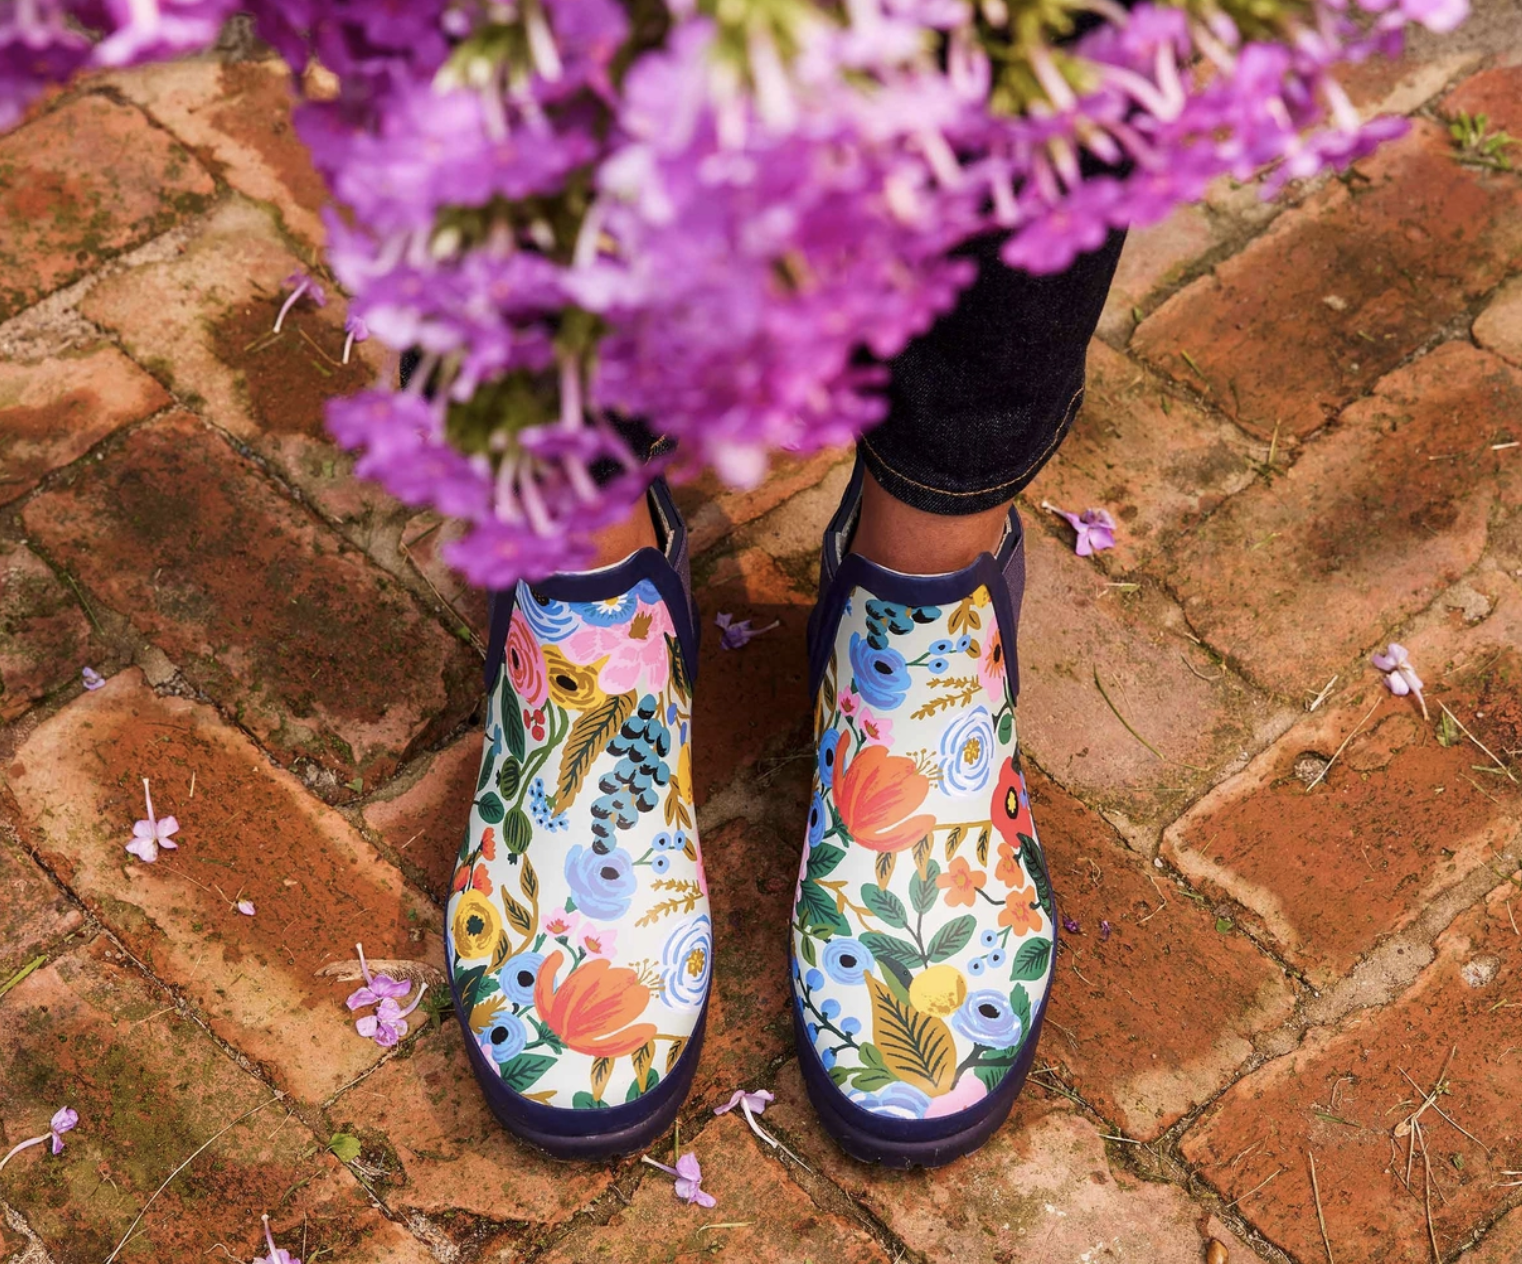 the colorful floral-print rainboots